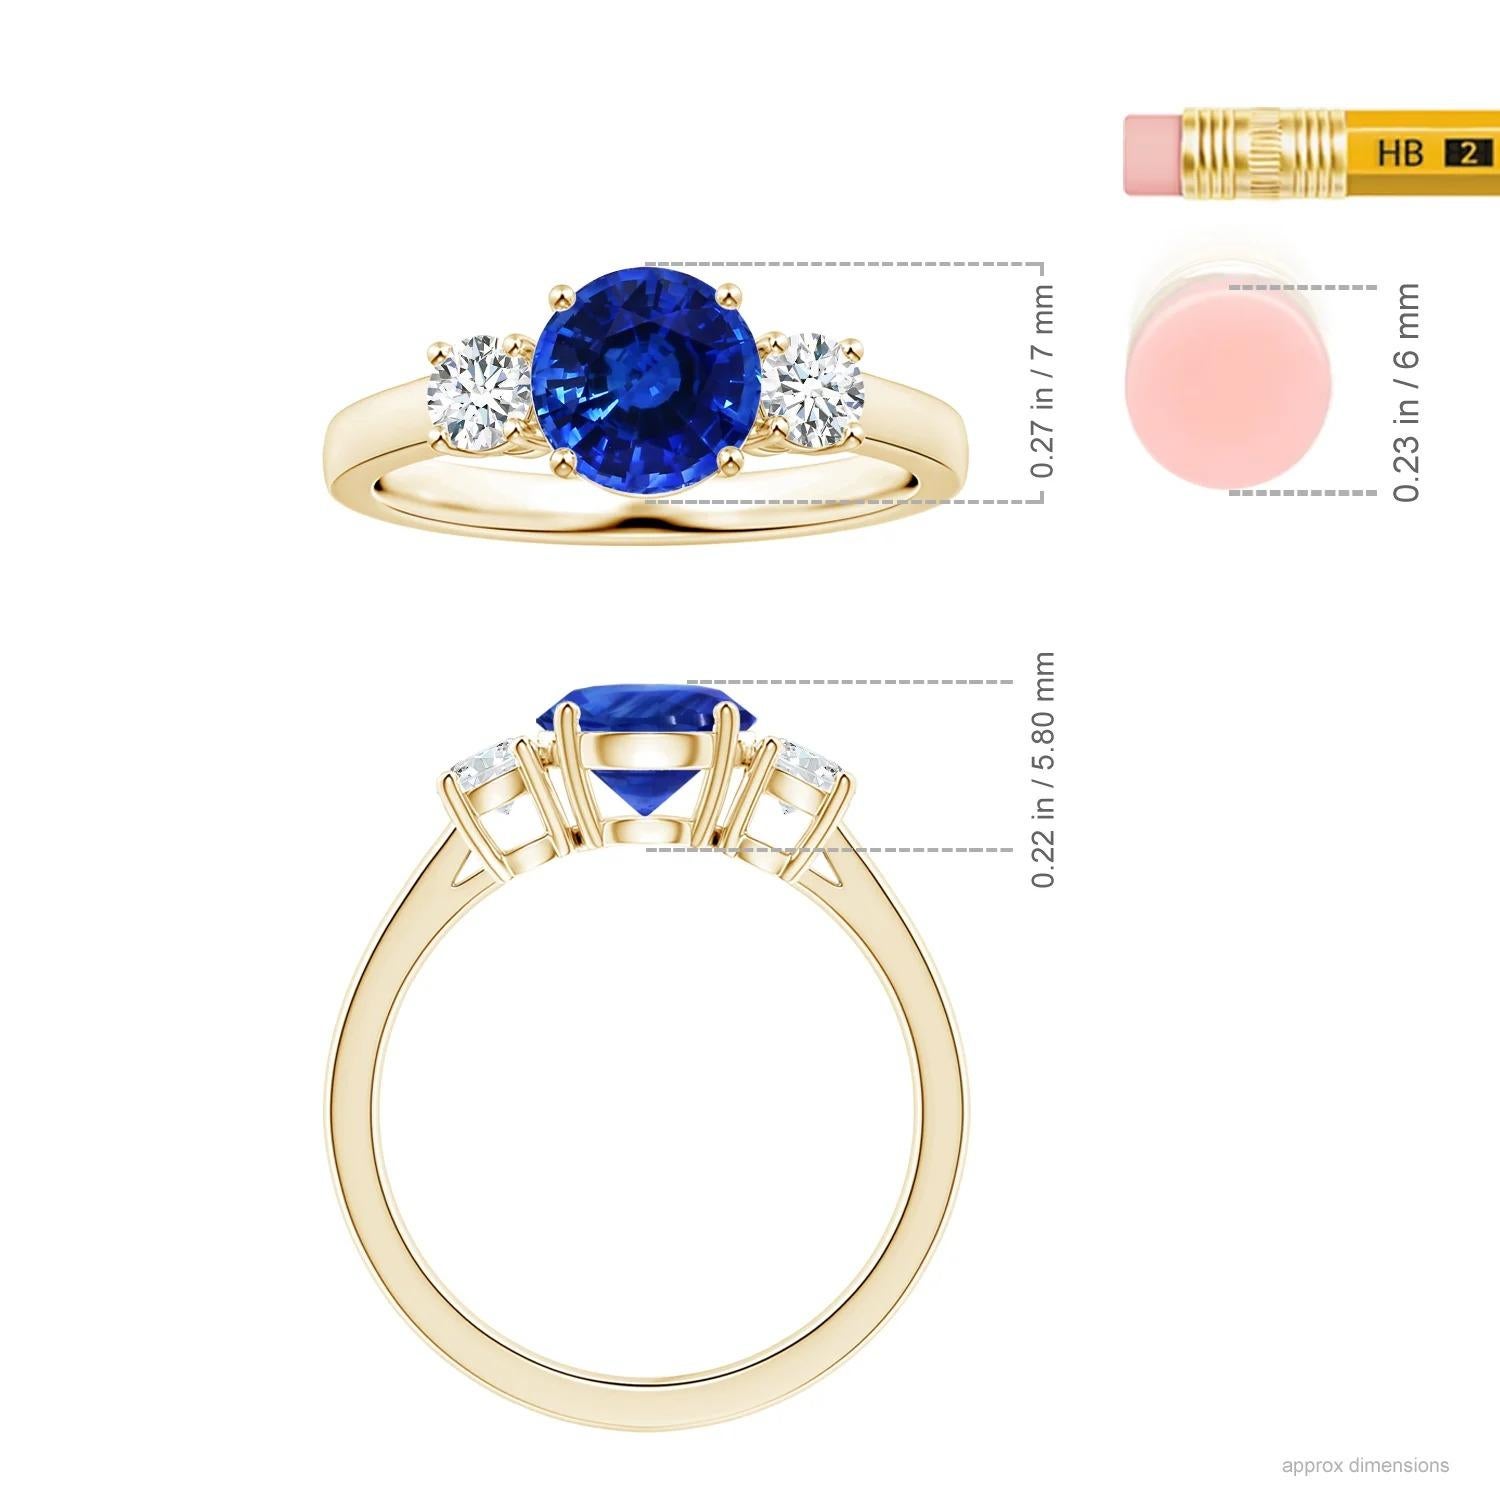 For Sale:  Angara Three Stone Gia Certified Blue Sapphire Ring in Yellow Gold with Diamonds 5